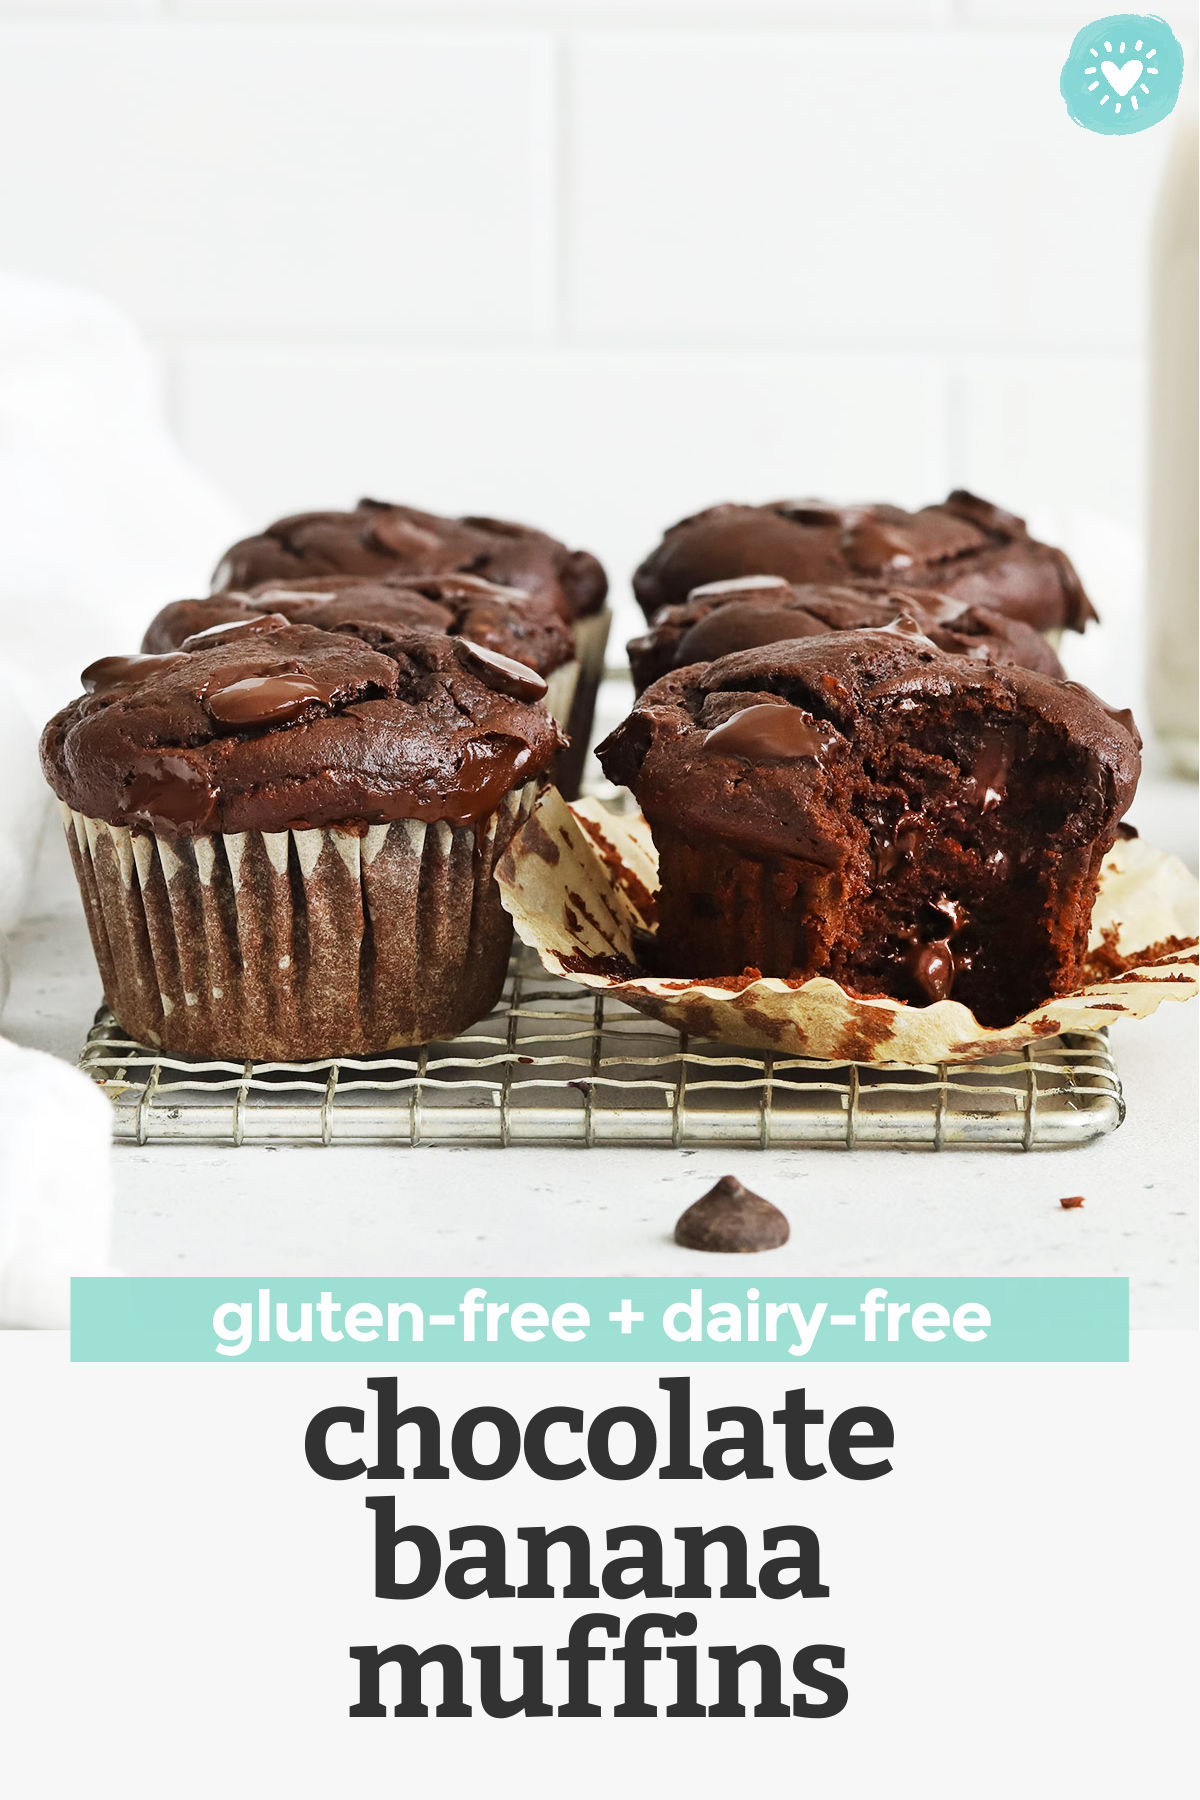 Gluten-Free Chocolate Banana Muffins - These gluten-free double chocolate banana muffins are light, fluffy, and loaded with ultra-chocolatey flavor. A favorite sweet treat that's easy to make any time! (Dairy-Free) // gluten-free chocolate chocolate chip muffins // gluten free banana muffins recipe #glutenfree #muffins #breakfast #snack #chocolate #banana